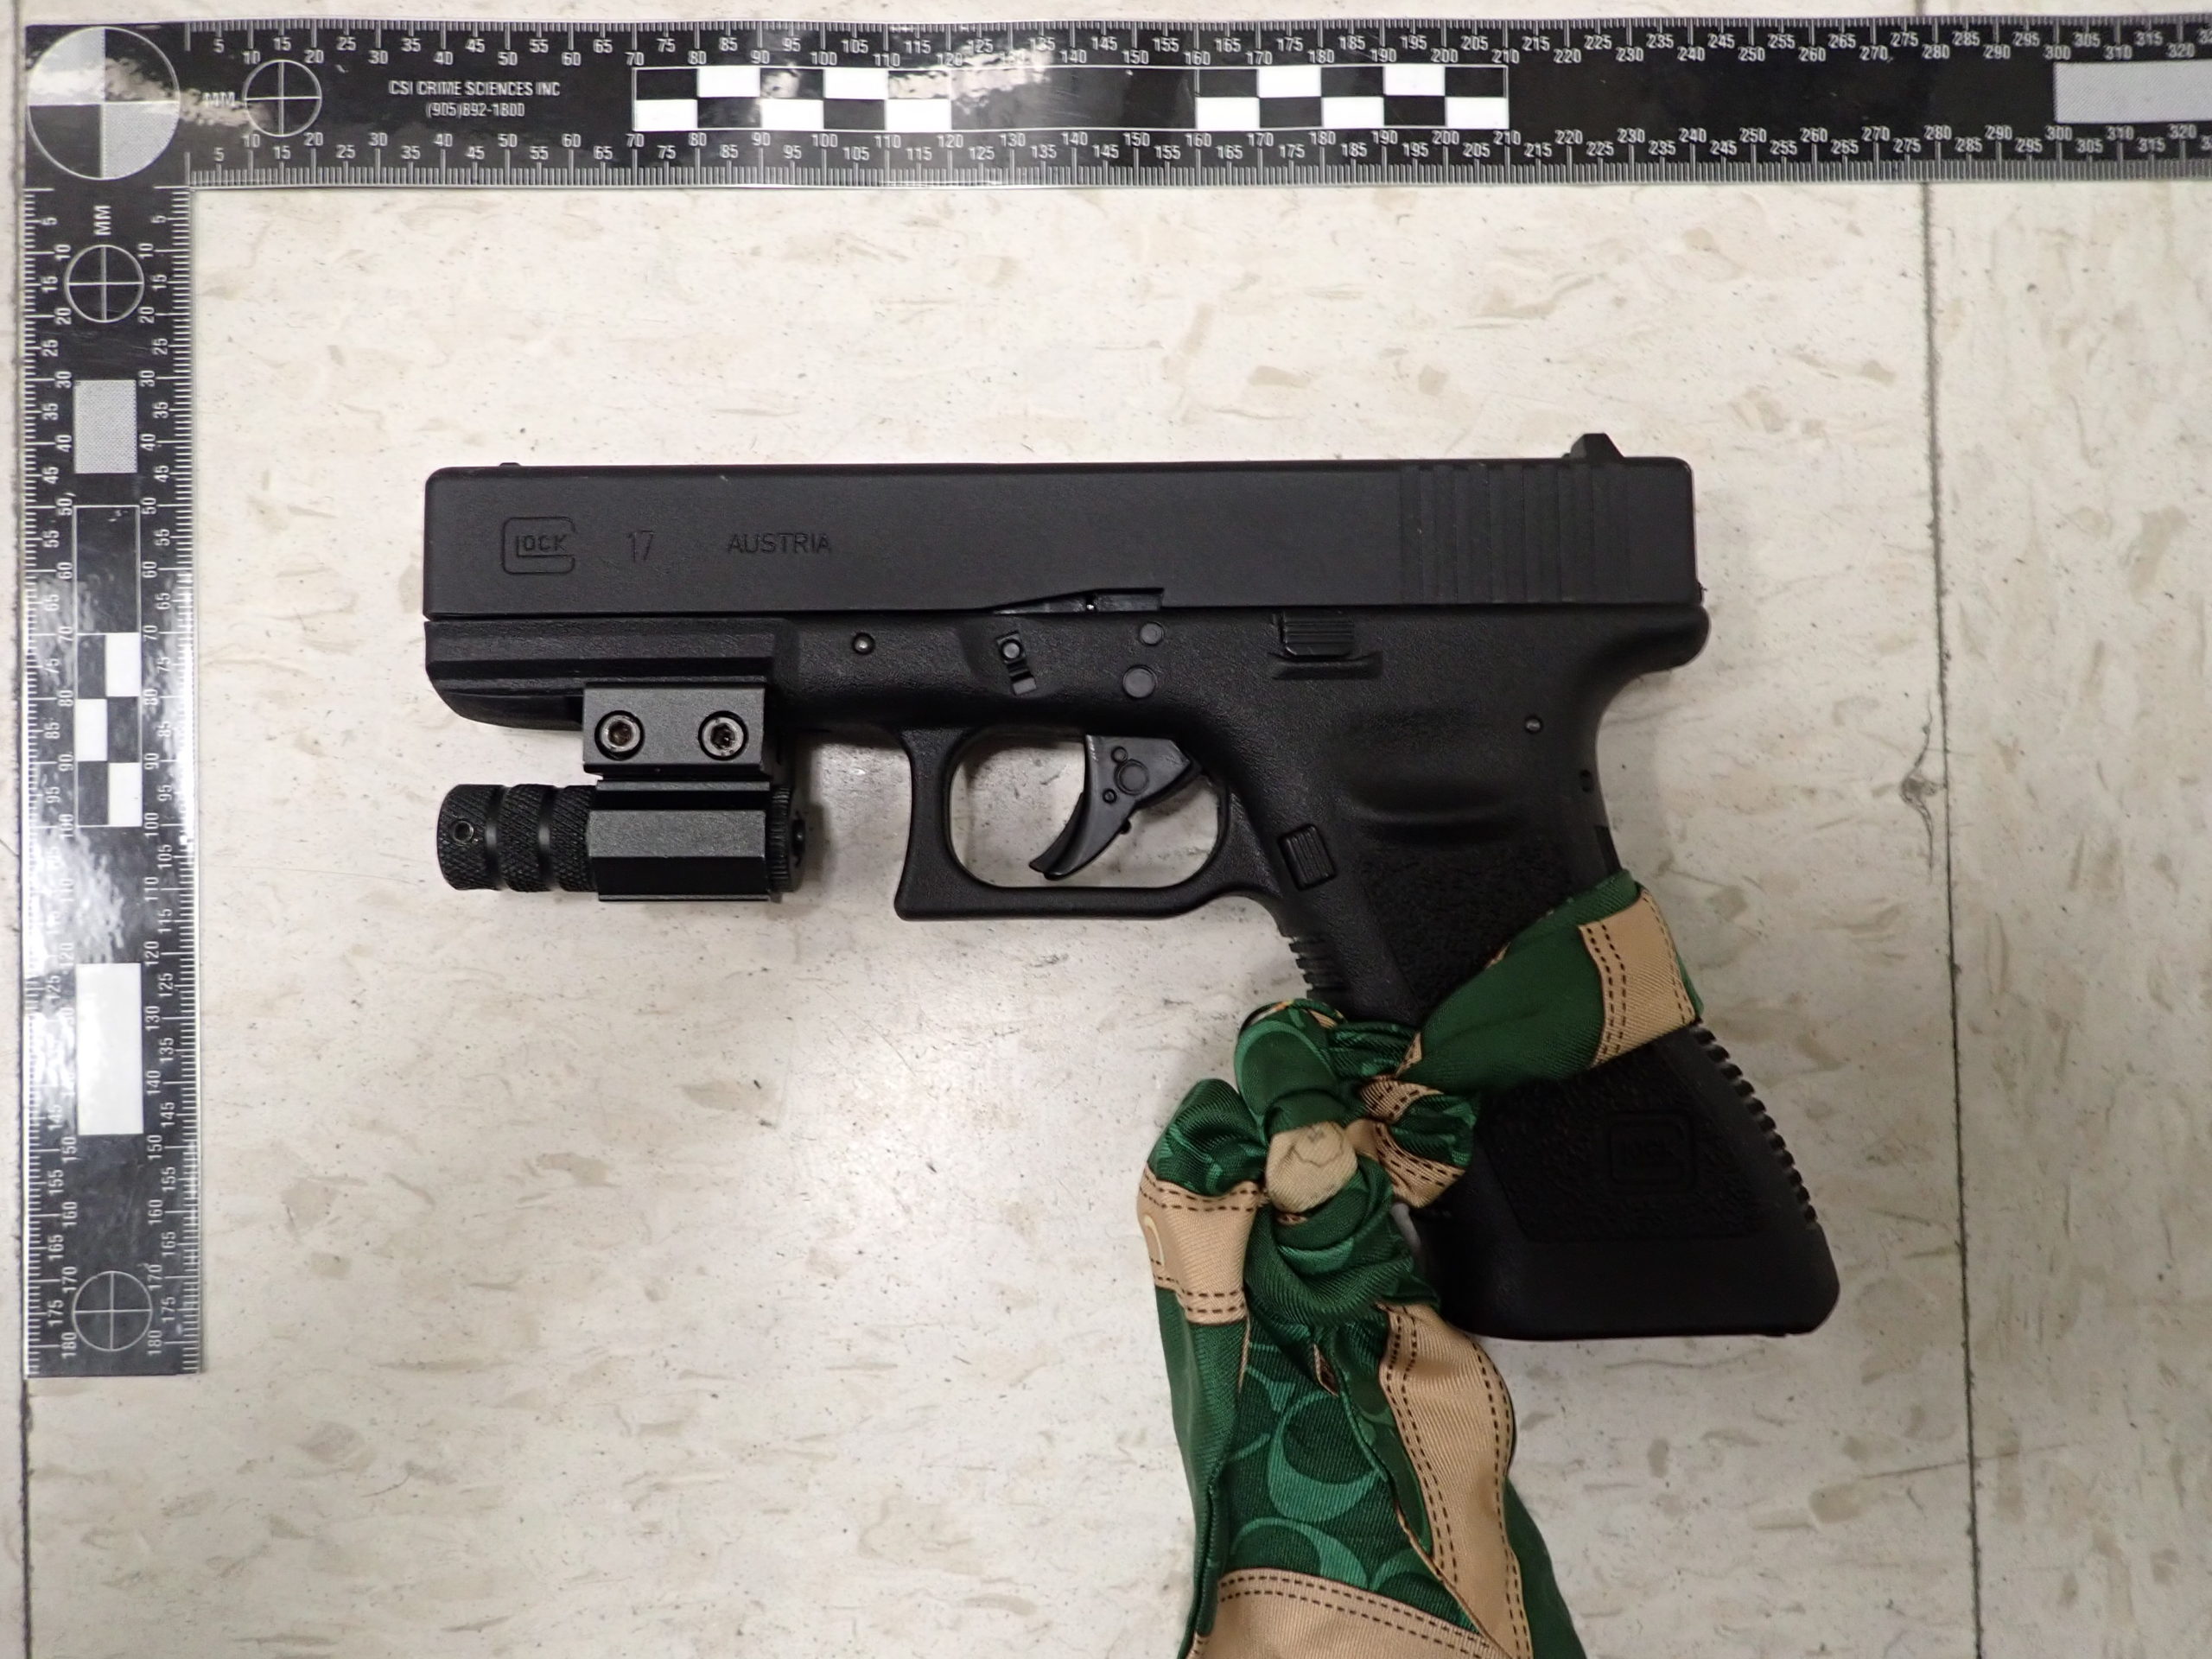 Stratford Police arrest a suspect holding what appeared to be a handgun